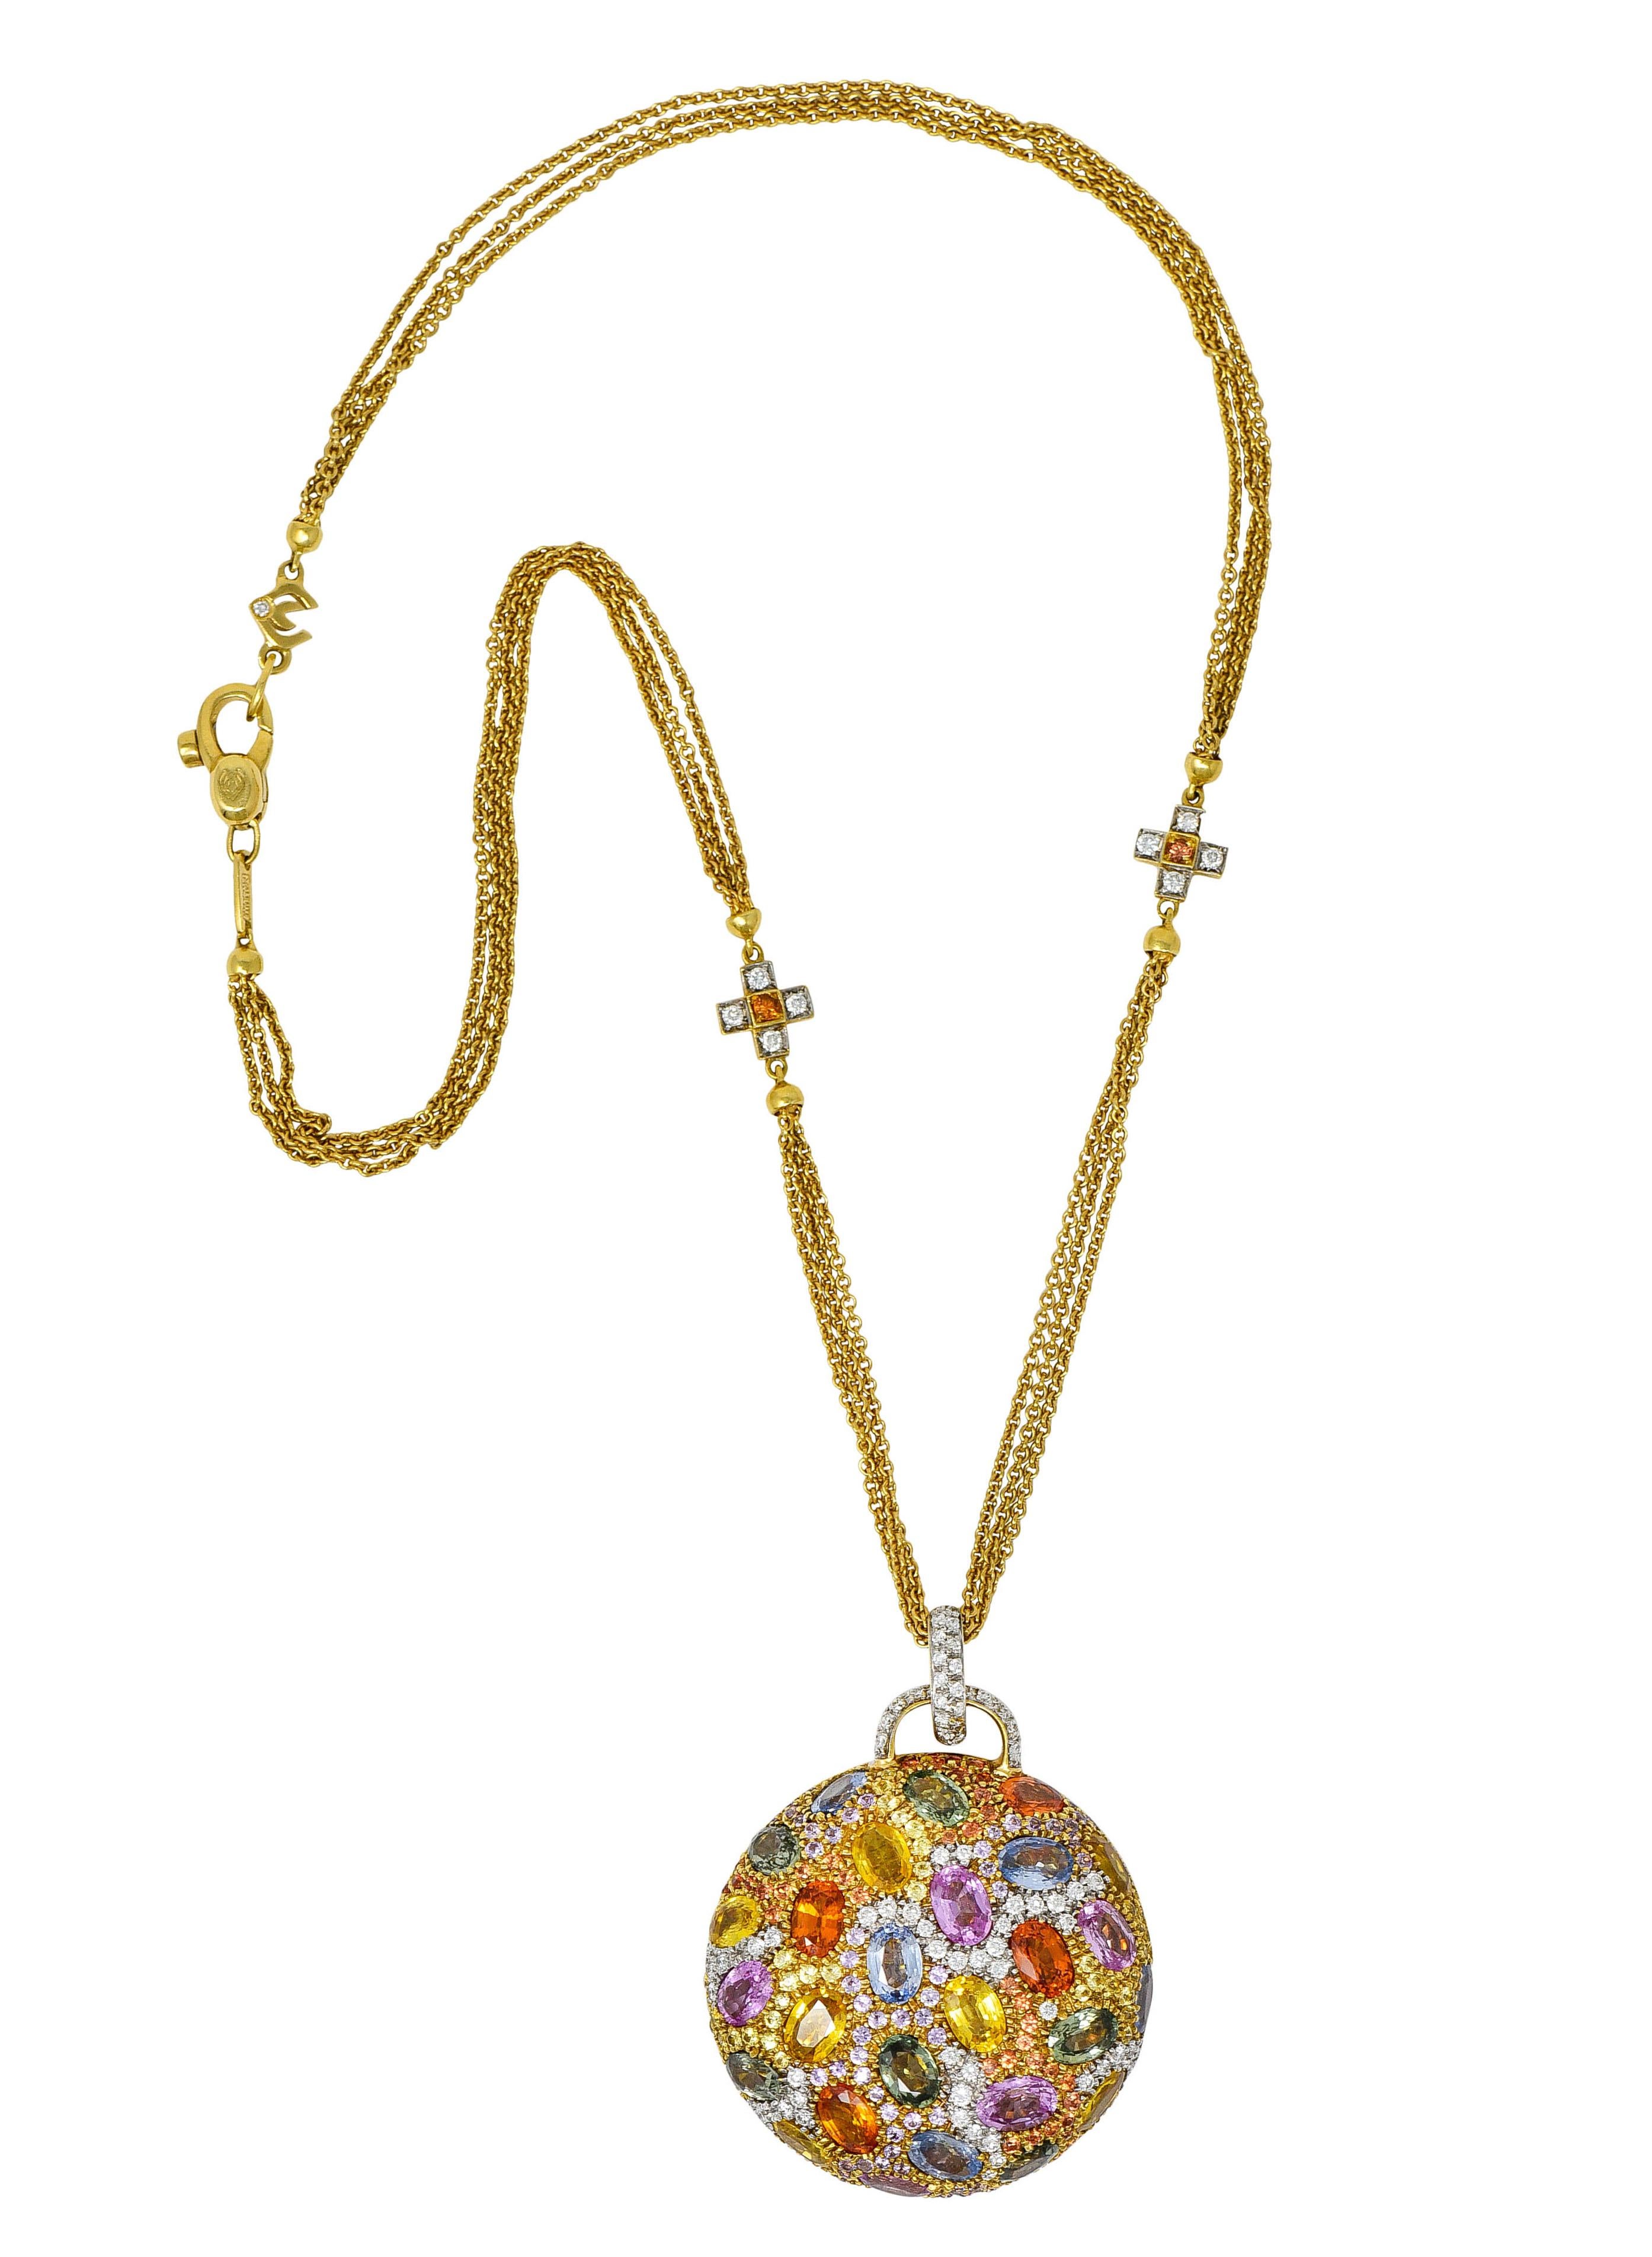 Multi-strand necklace is accented by two cross motif stations and completes as a lobster clasp with logo links

Circular pendant is pavè set throughout by colorful sapphires and round brilliant cut diamonds

Oval cut sapphires weigh in total